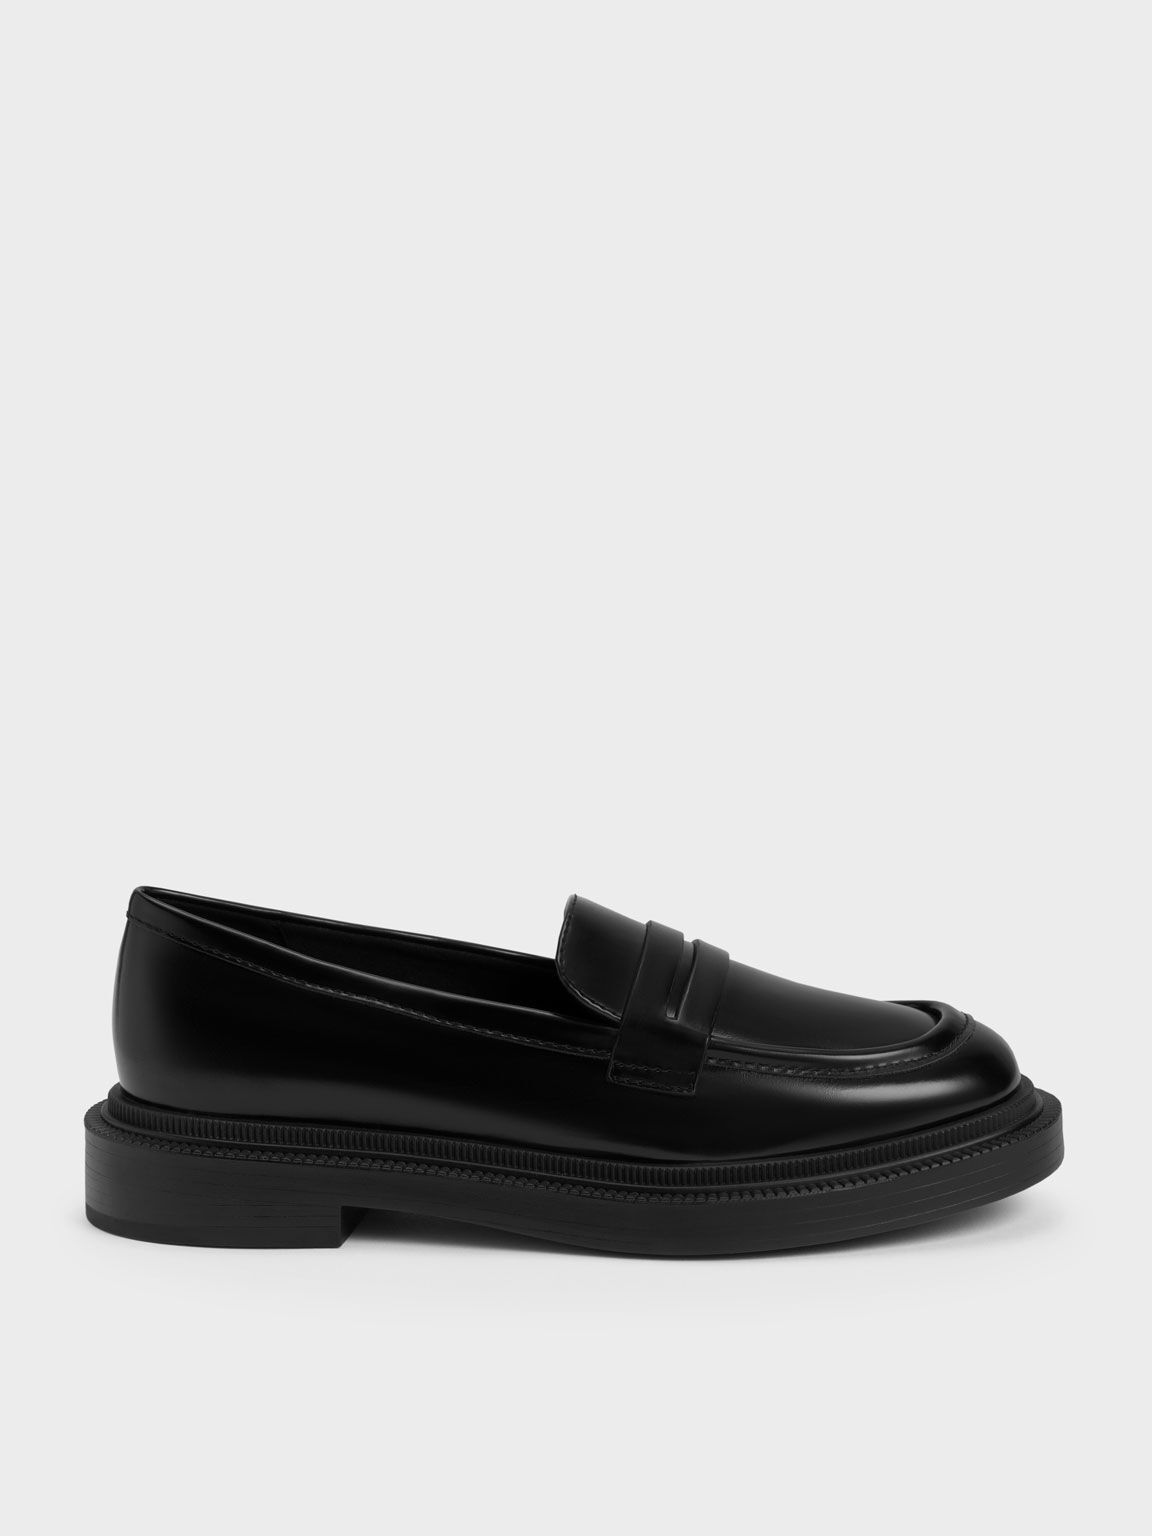 Black Classic Penny Loafers - KEITH US